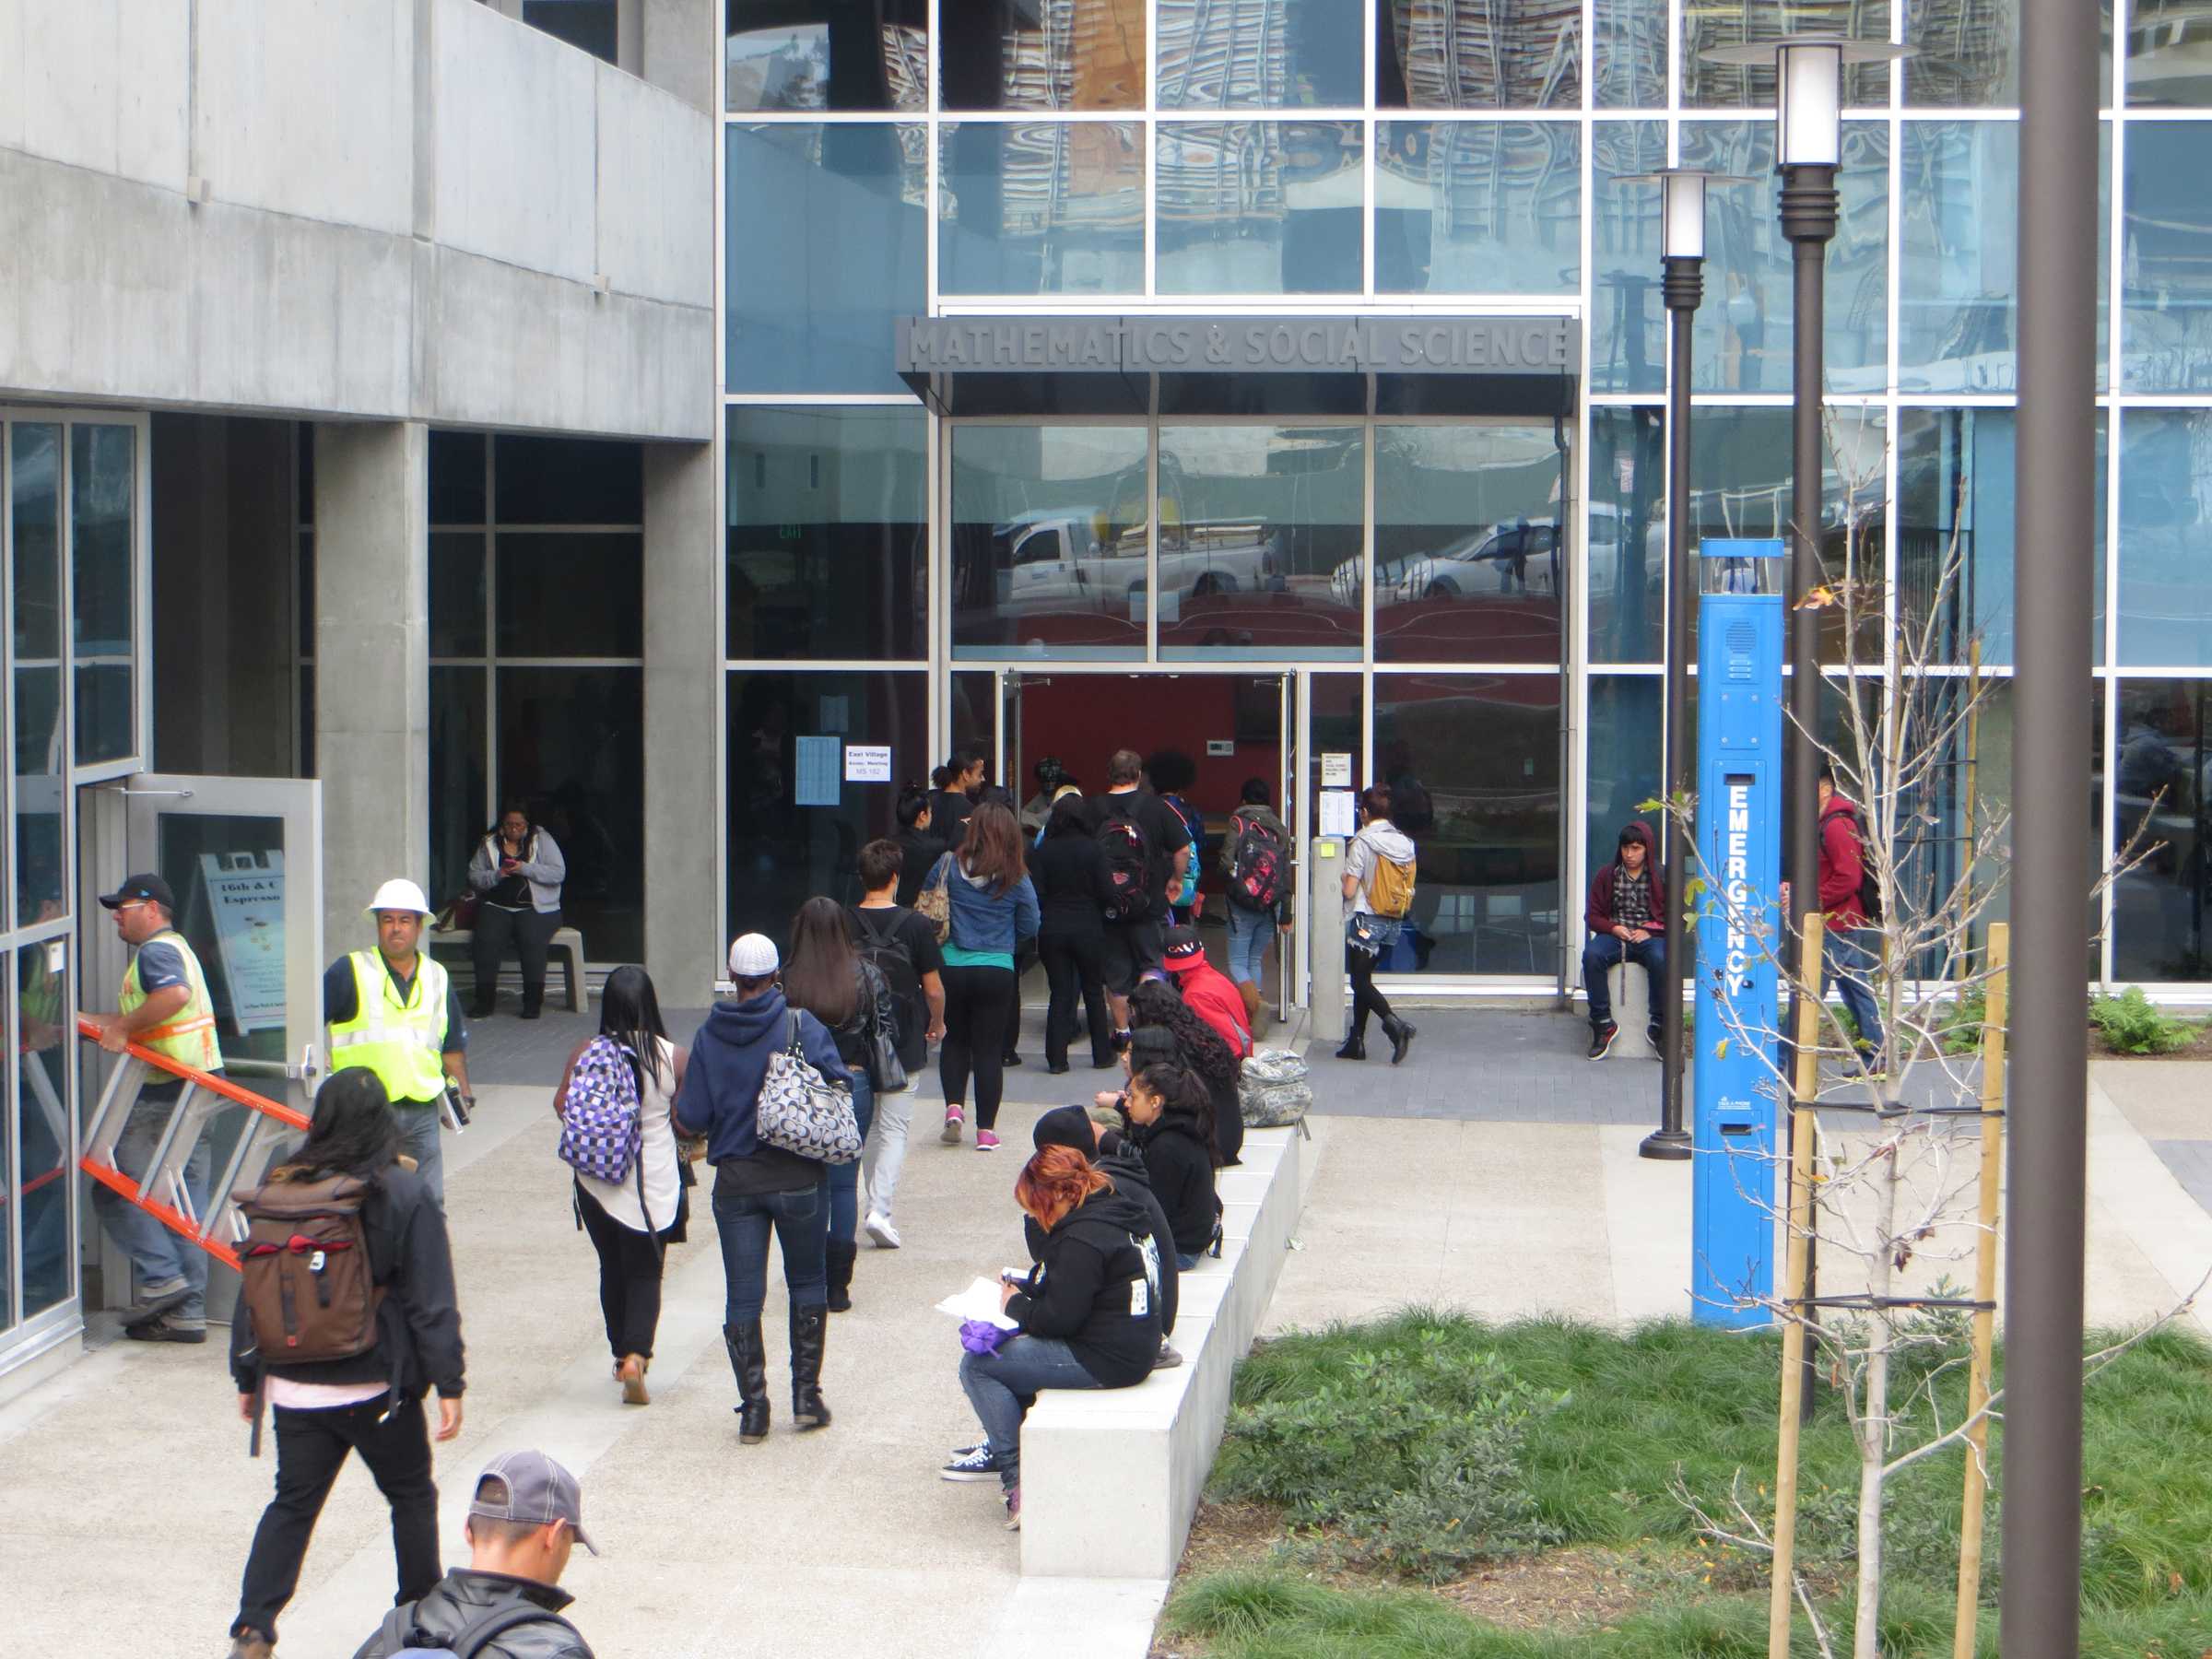 Students enter the Math and Social Sciences building for their first class, which has been open since Jan. 28. The building is located on C St and 16th St. -Ally Browne, City Times